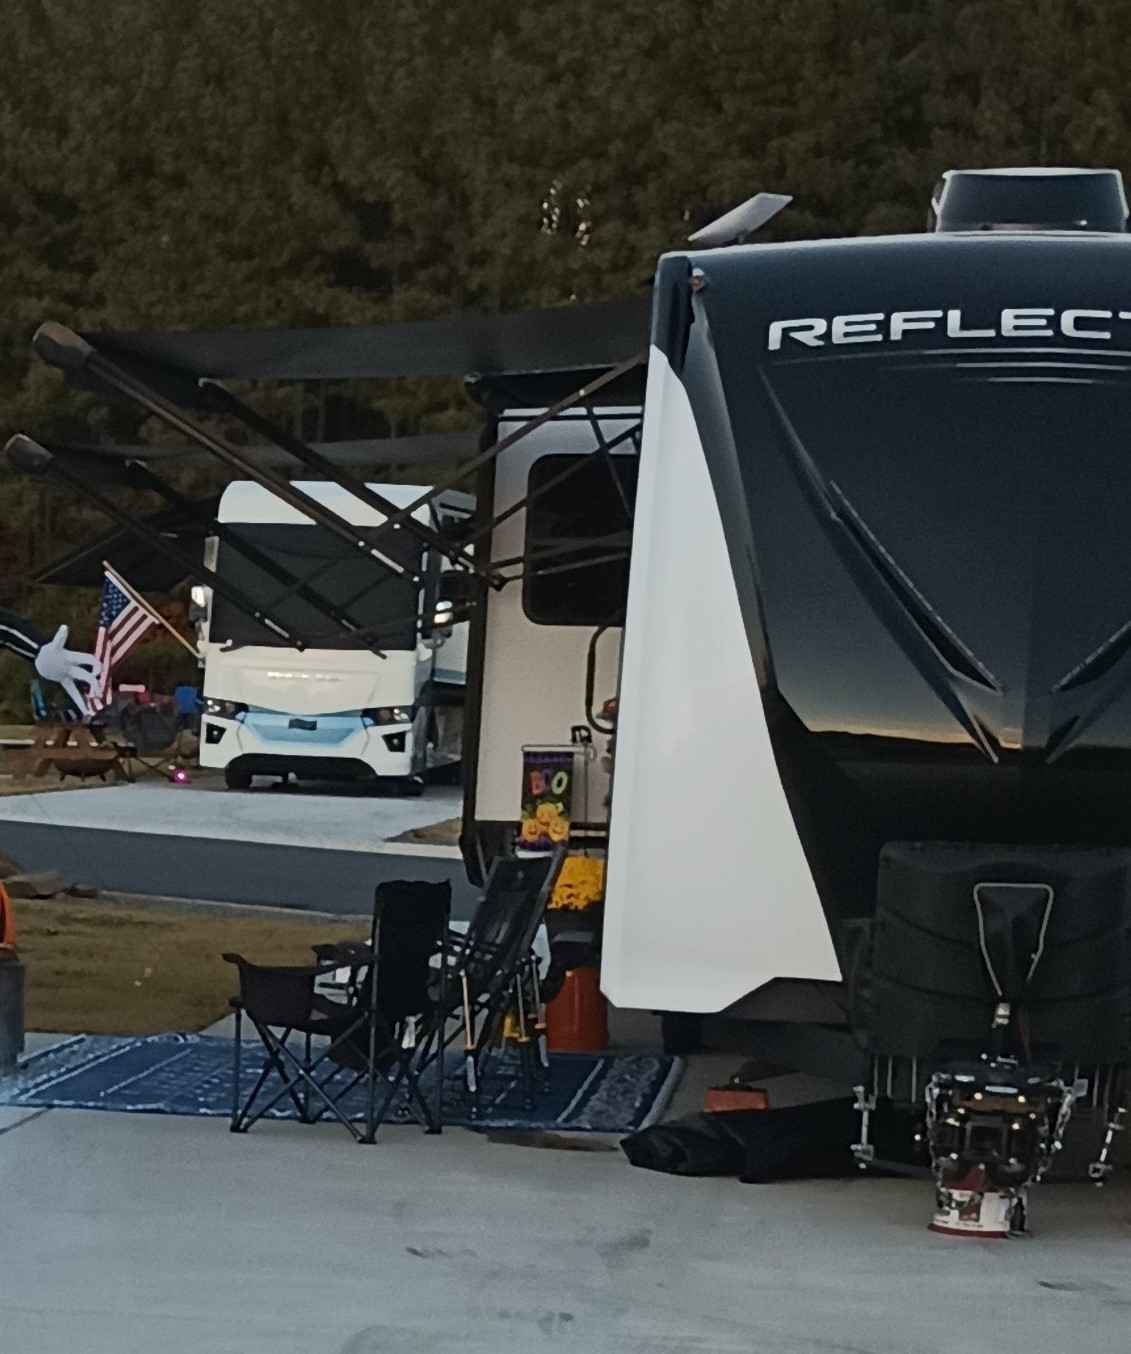 Full Time RVing: Everything You Need to Know